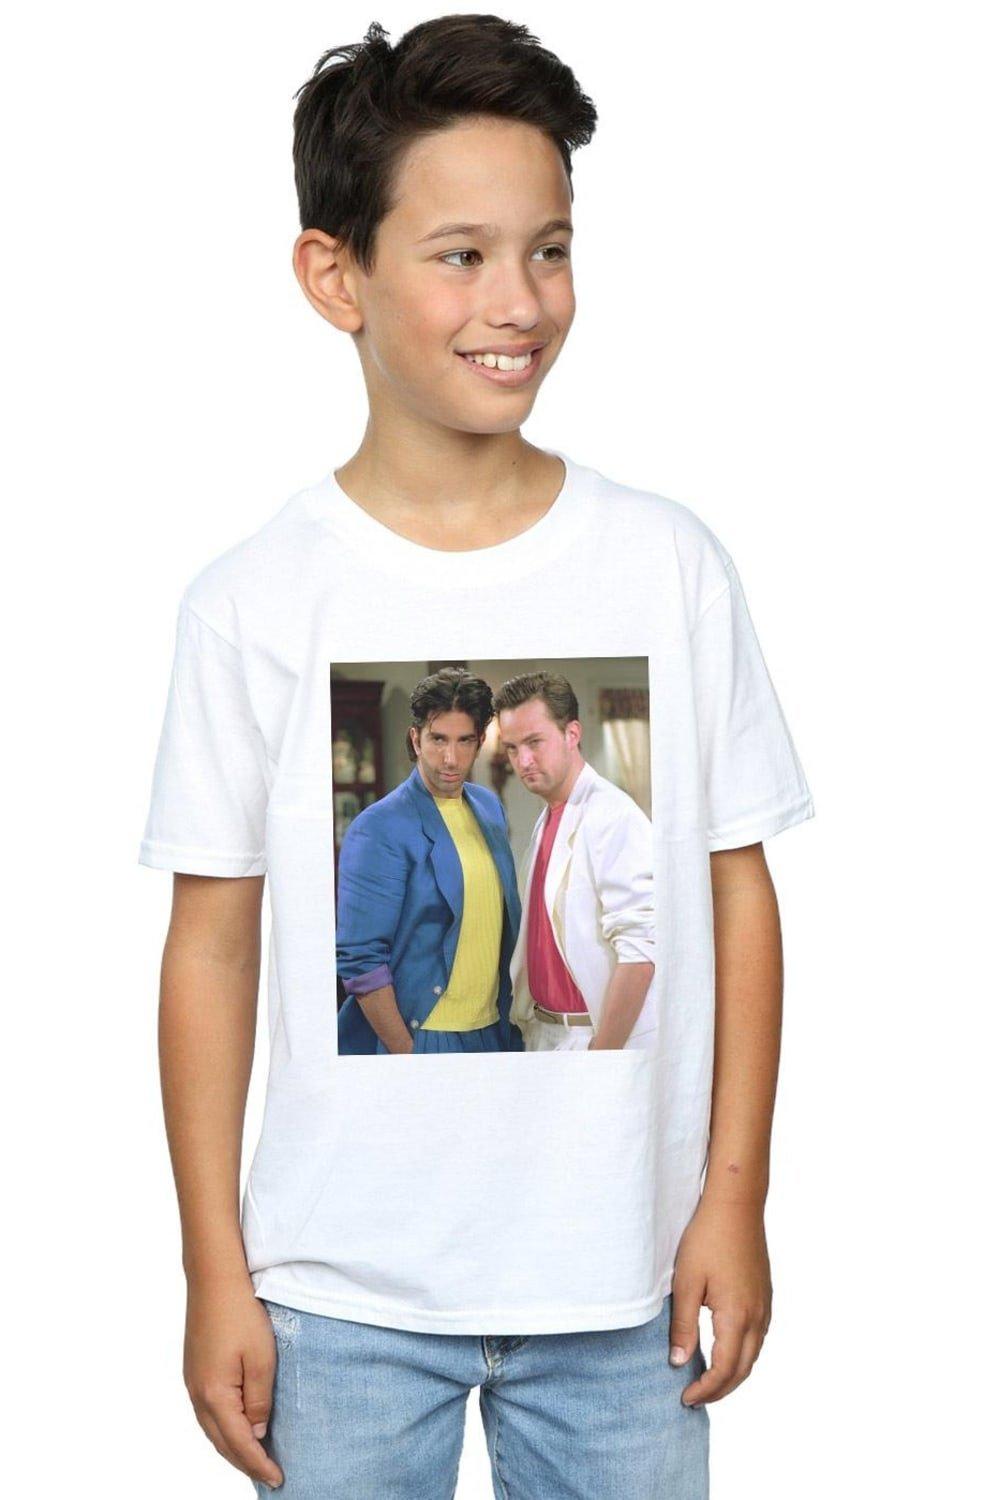 80’s Ross And Chandler T-Shirt